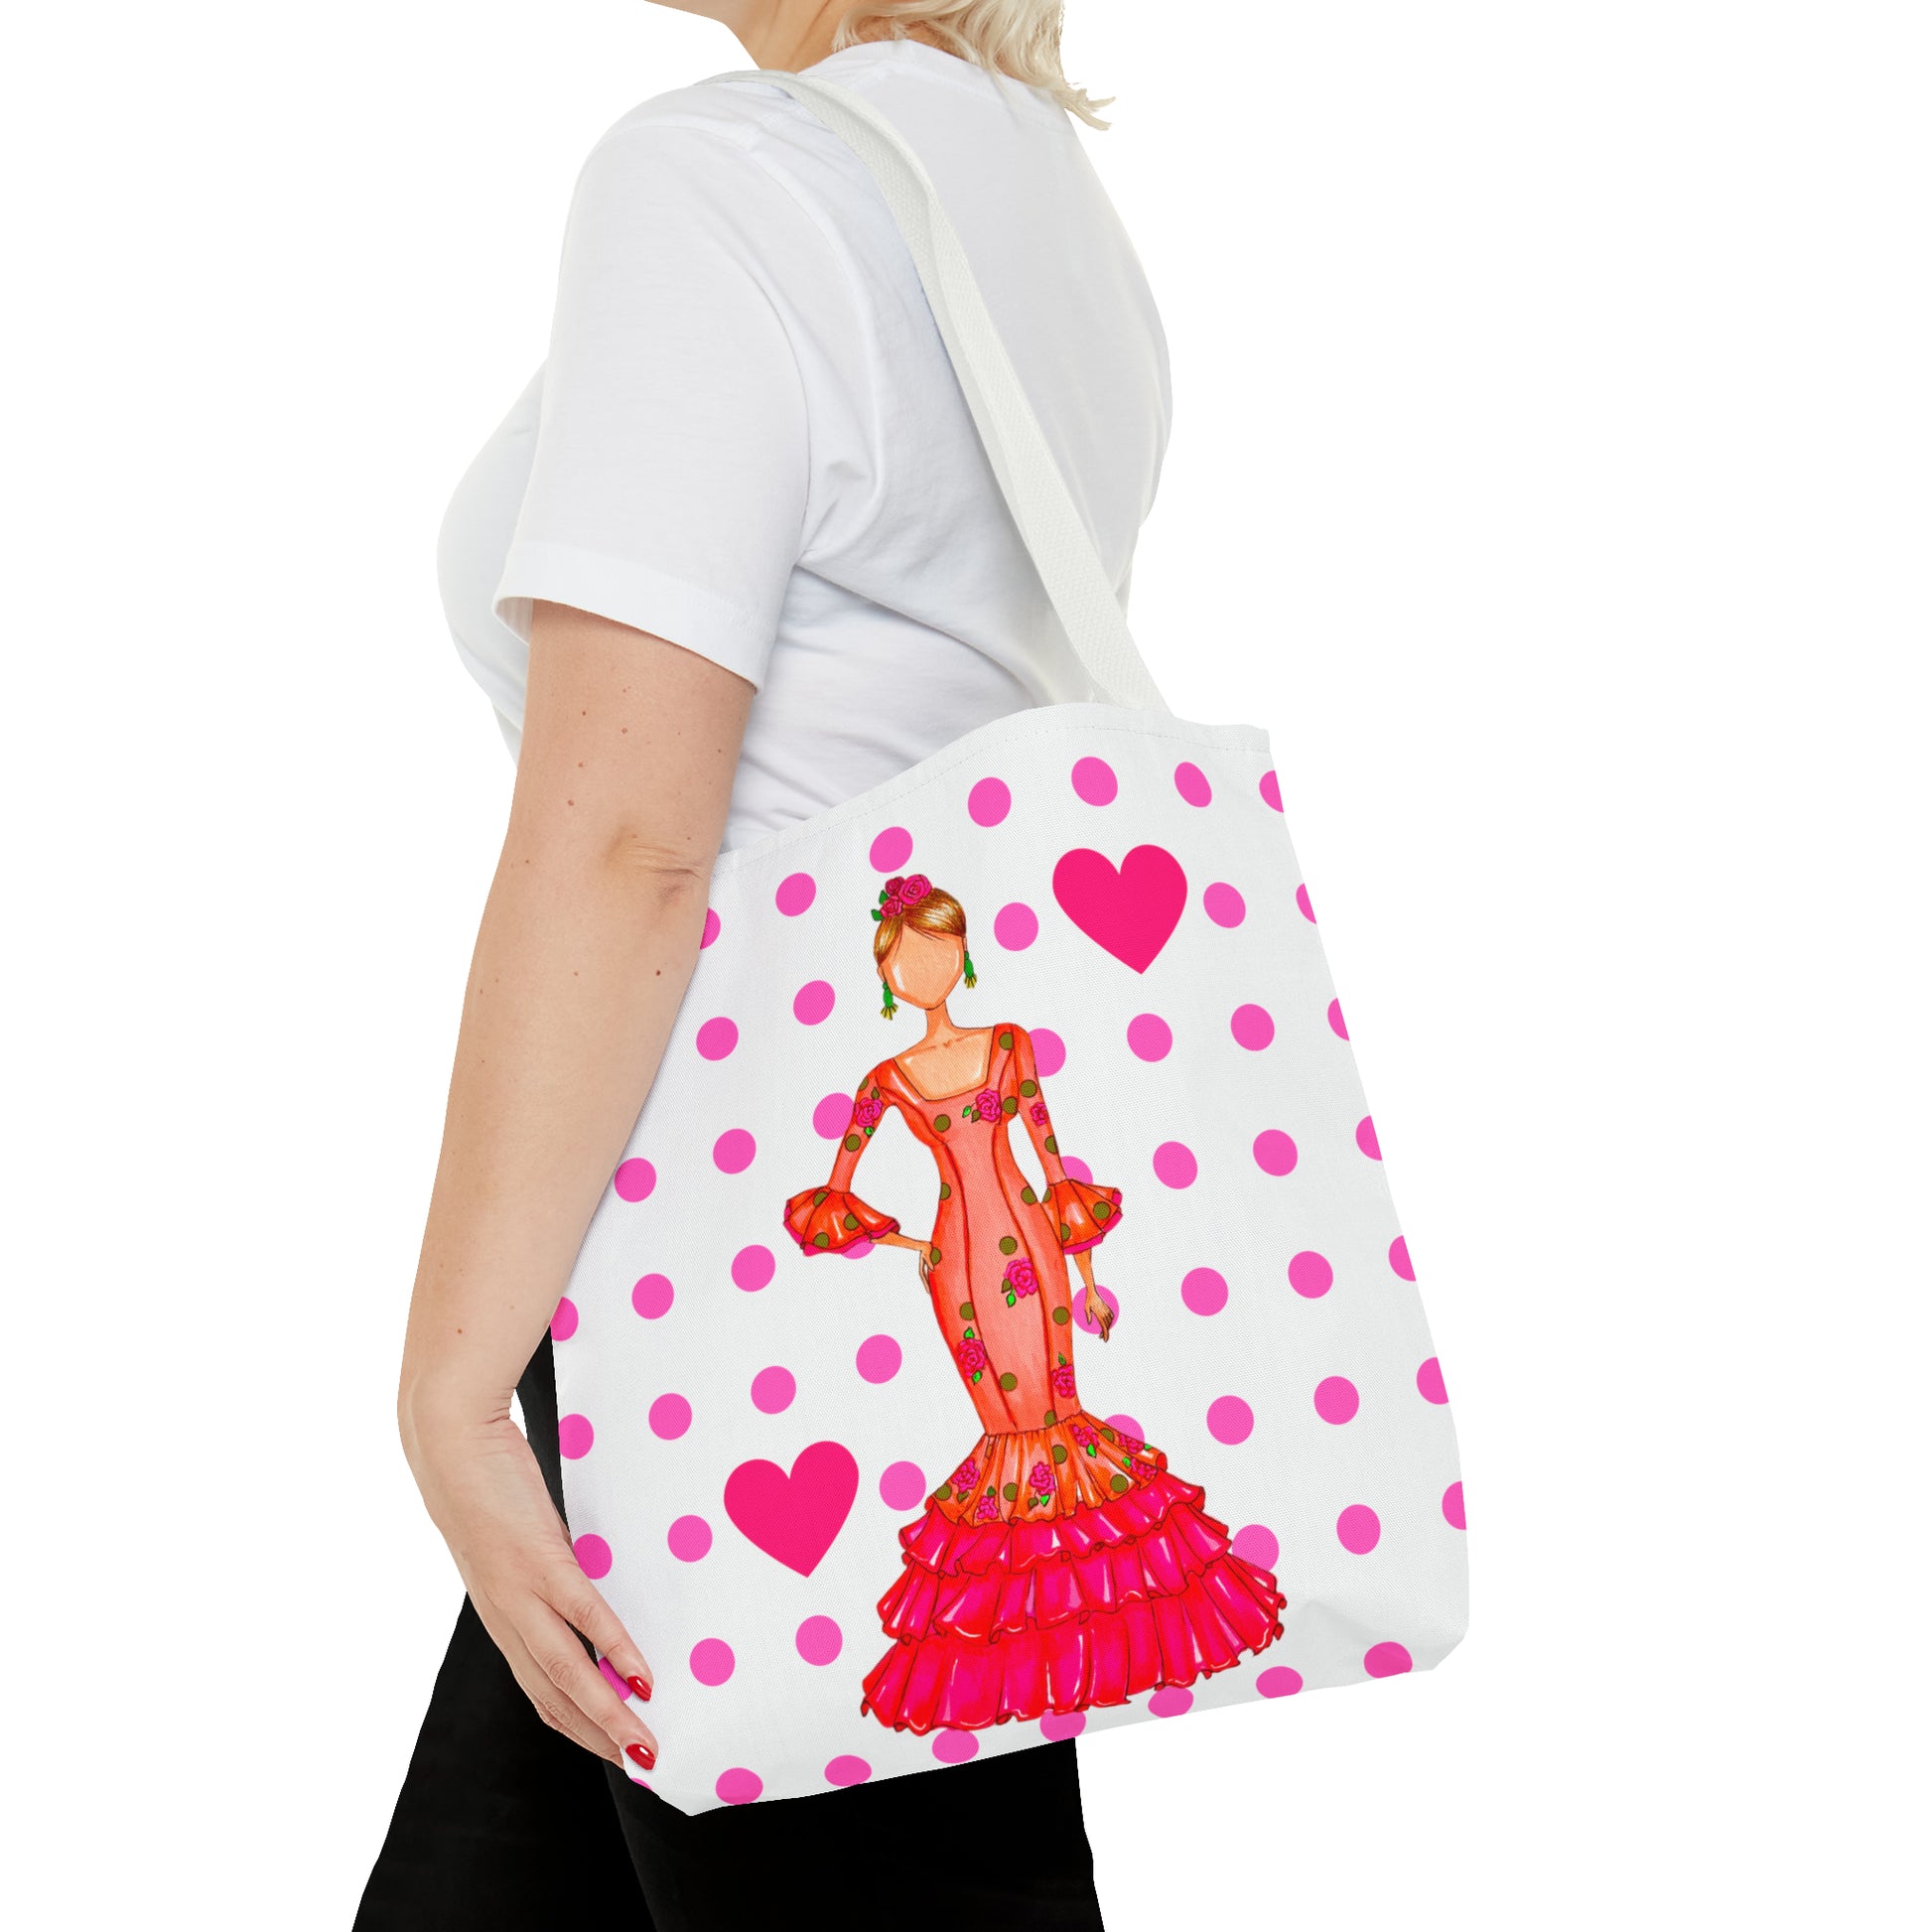 a woman carrying a pink and white polka dot purse